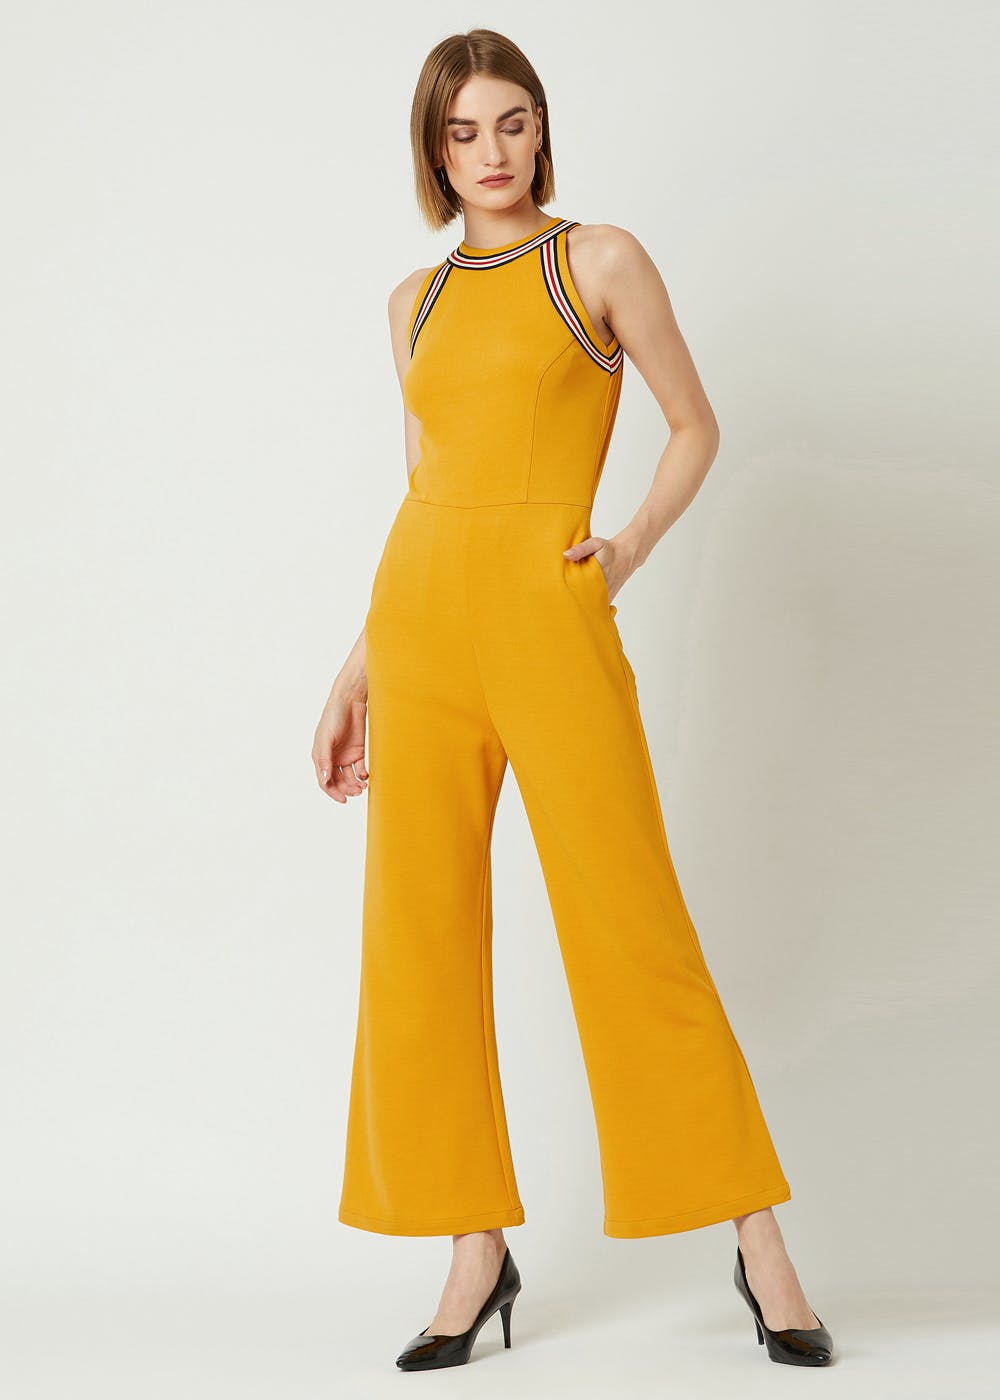 Get Striped Patch Detail Yellow Jumpsuit at ₹ 1169 | LBB Shop